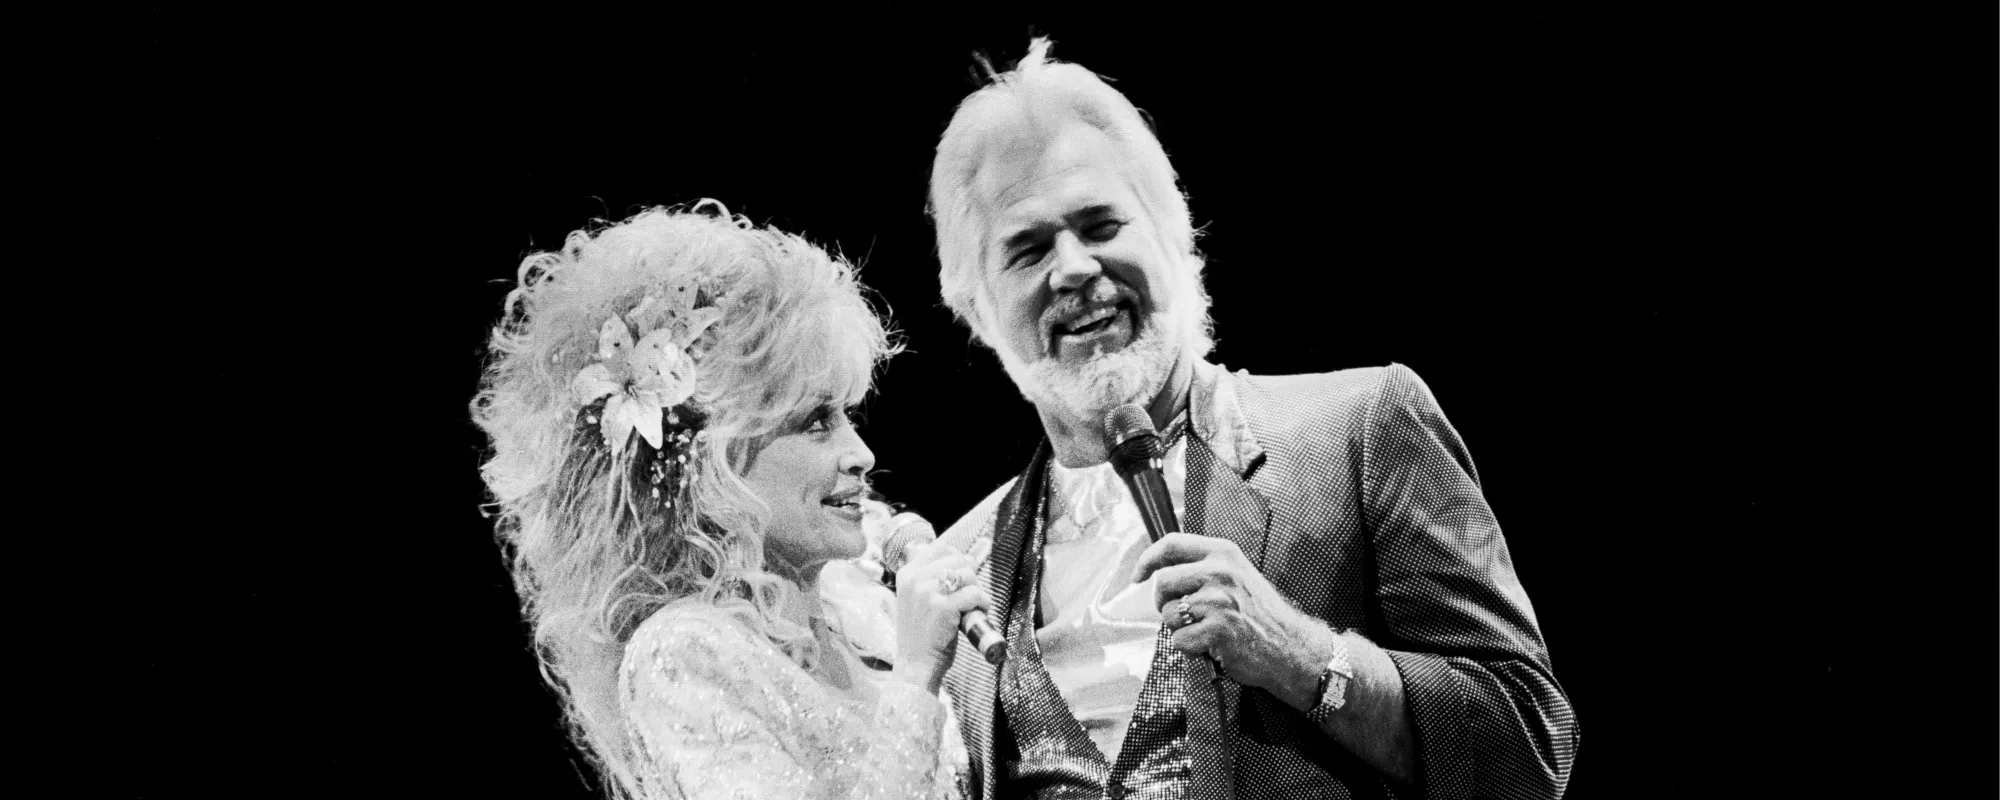 Did You Know? Kenny Rogers and Dolly Parton’s “Islands in the Stream” Was Written for This Solo Artist